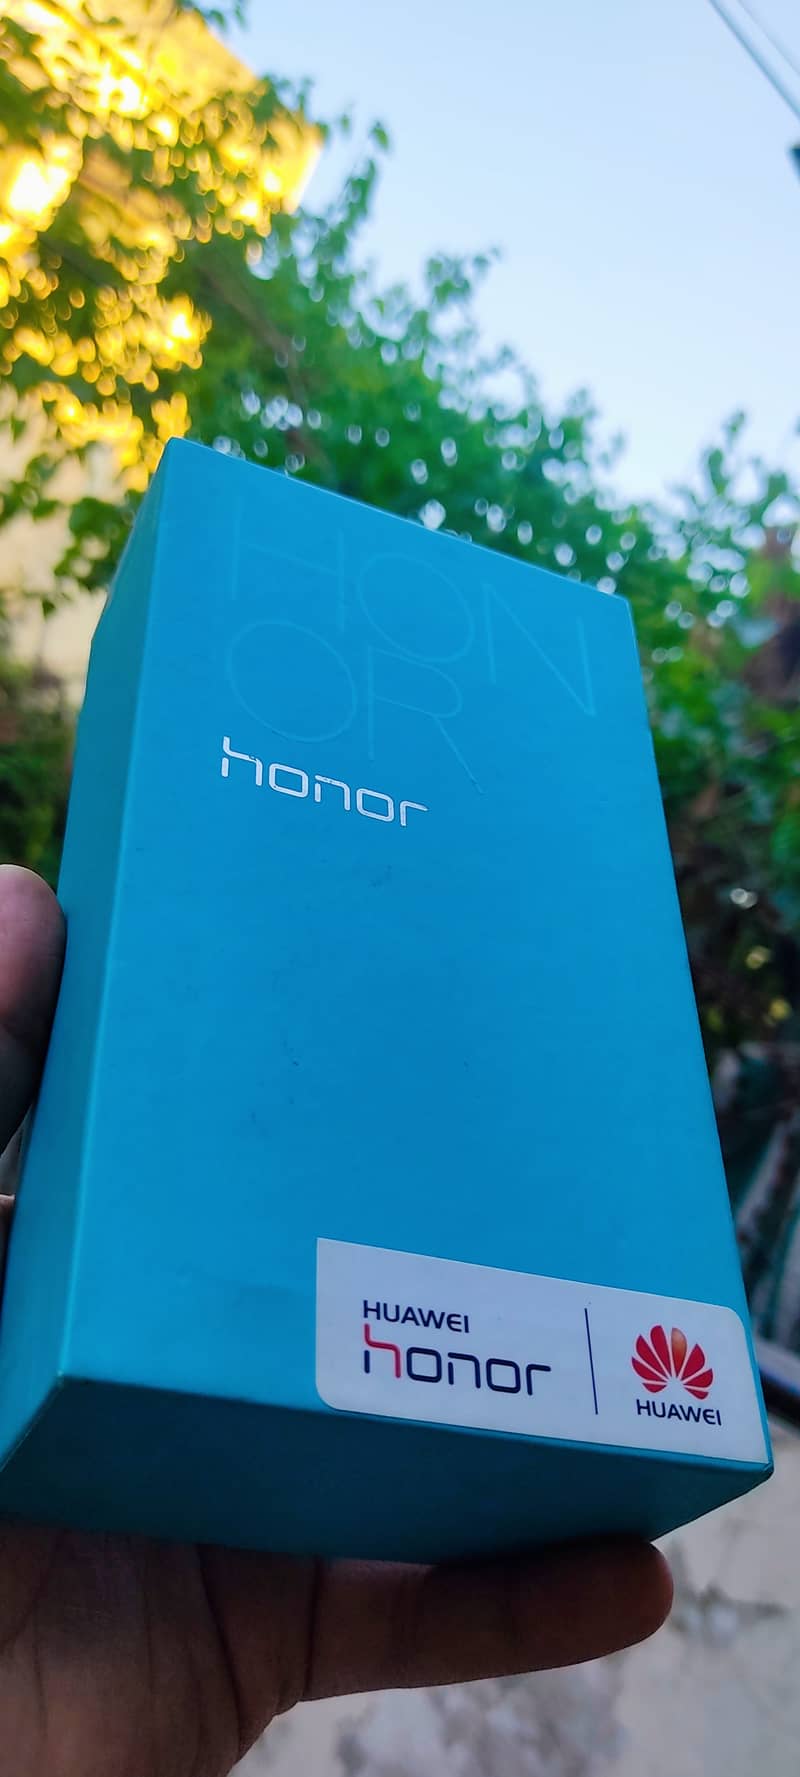 Huawei Honor For Sale 6